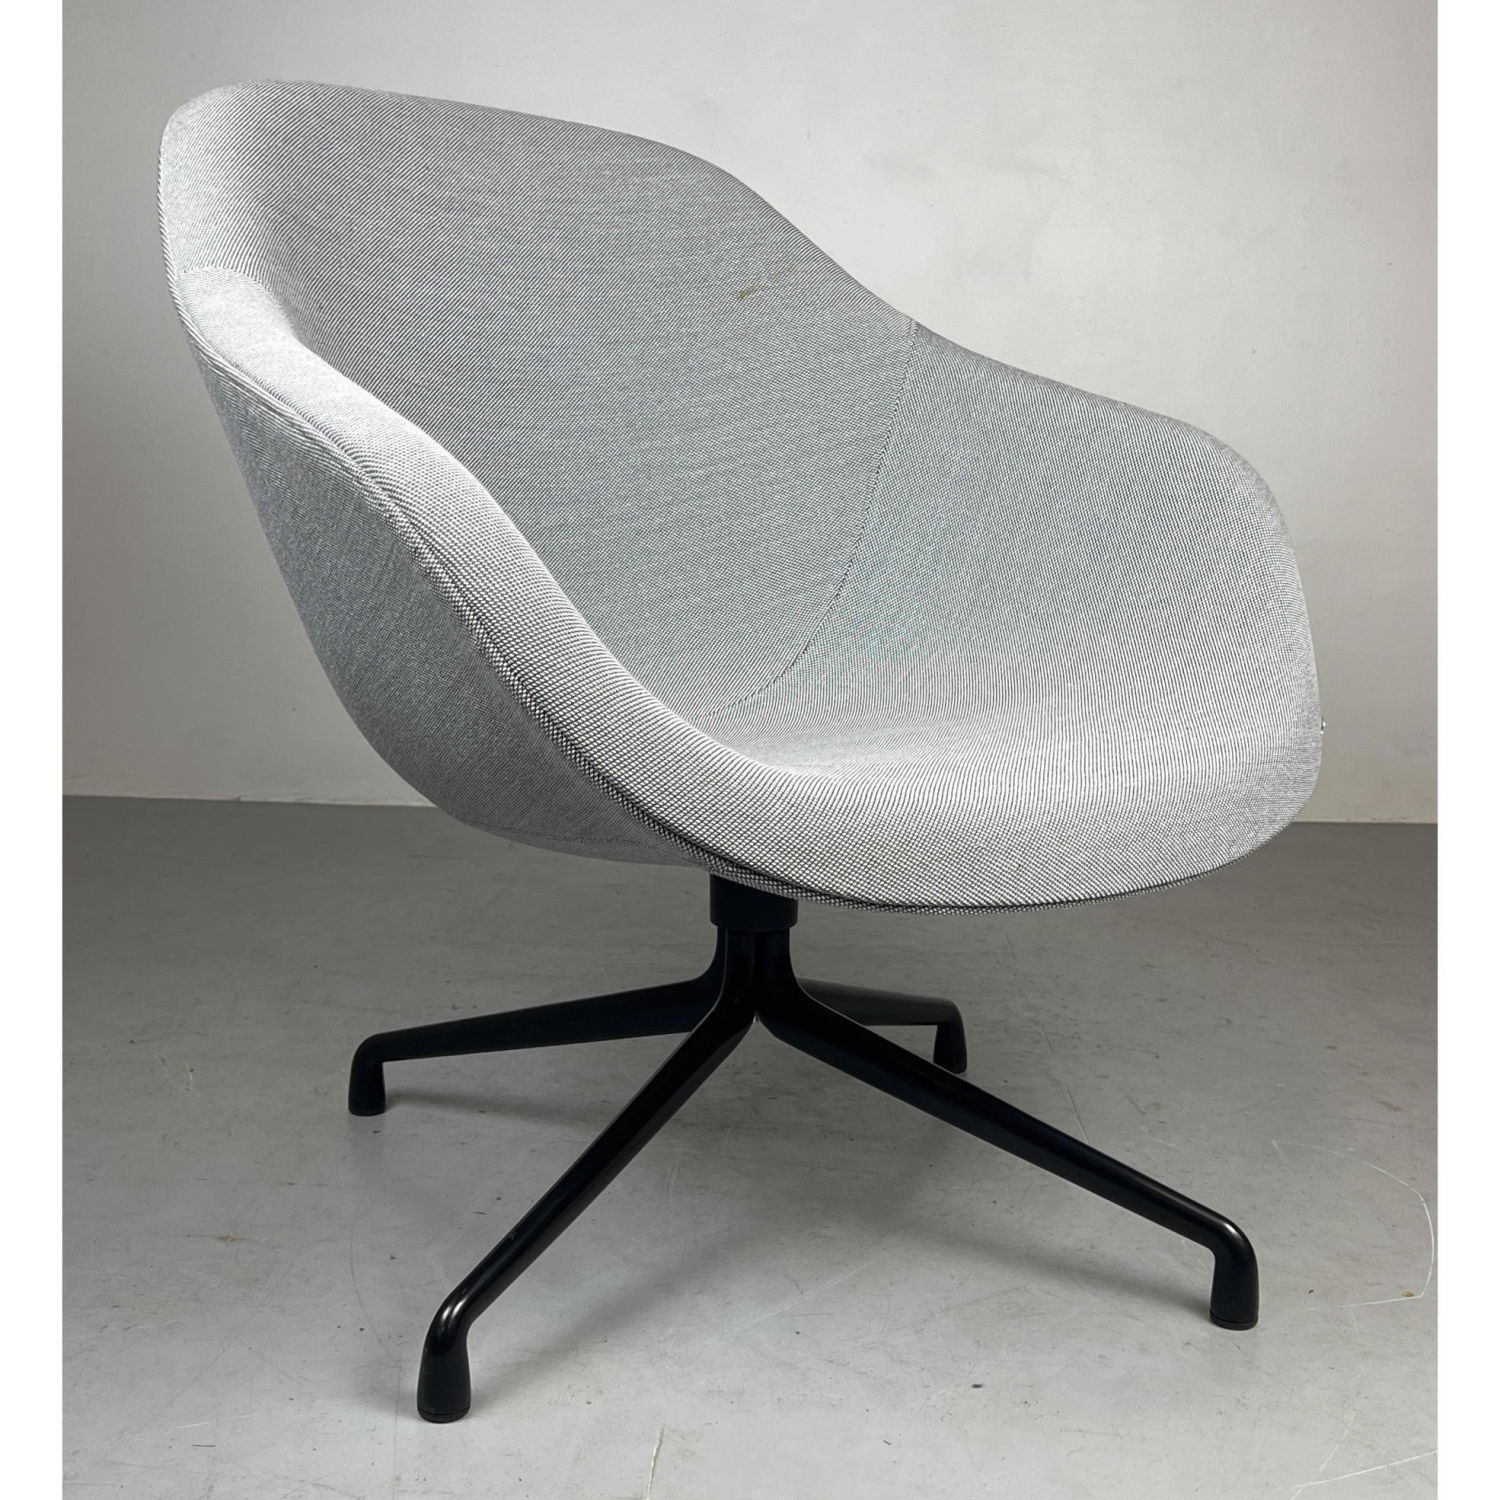 Hee Welling for Hay Lounge Chair.